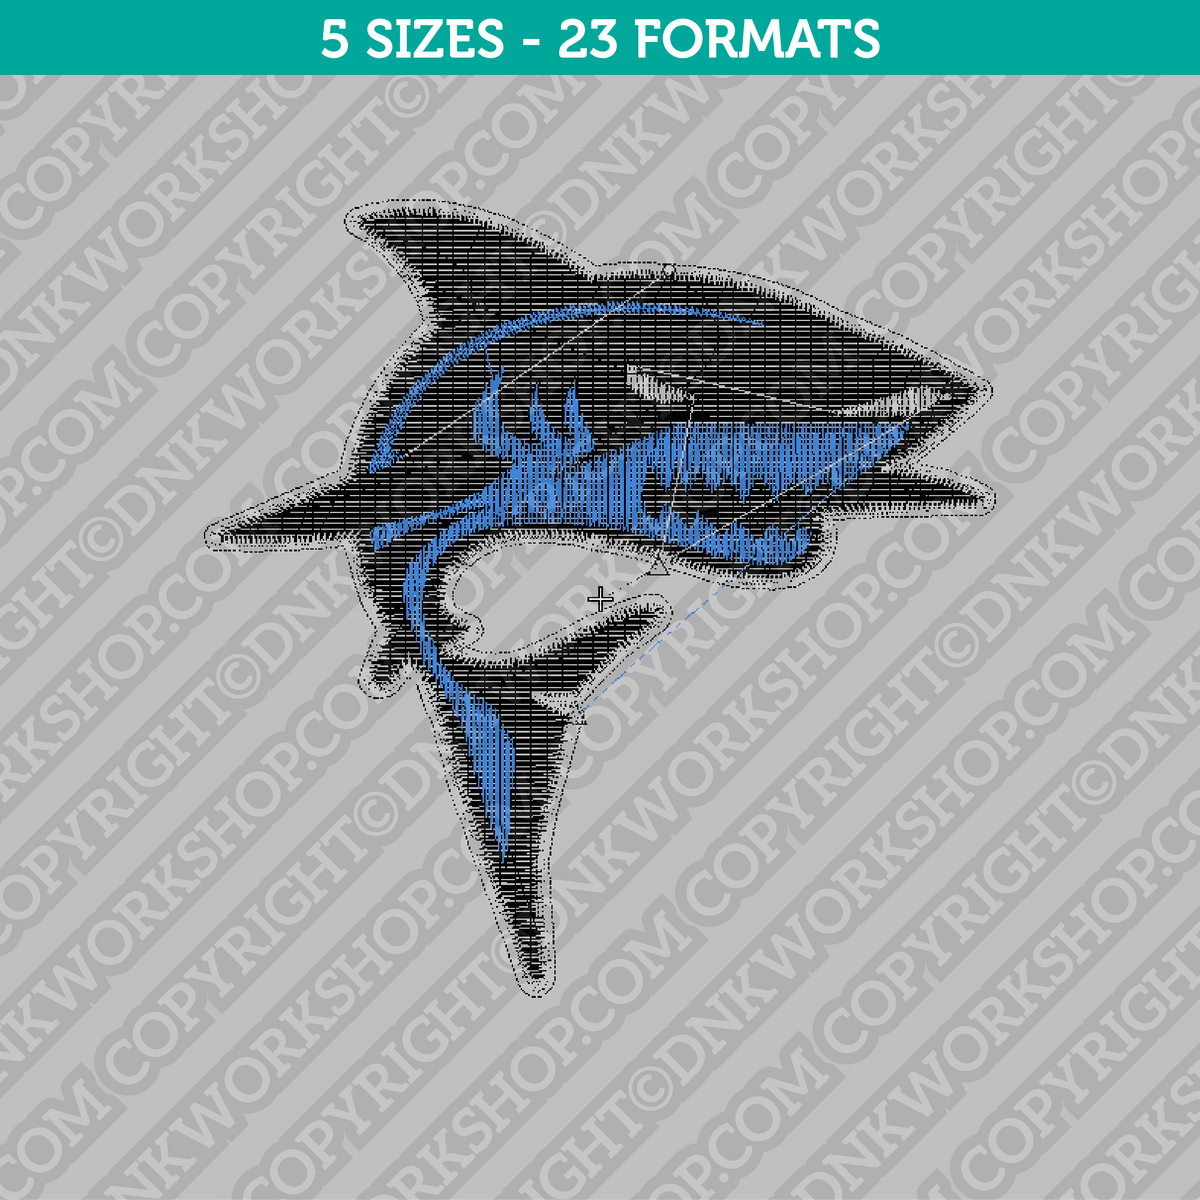 San Jose Sharks Embroidery Design ⋆ 5 sizes included ⋆ Blu Cat Red Dog